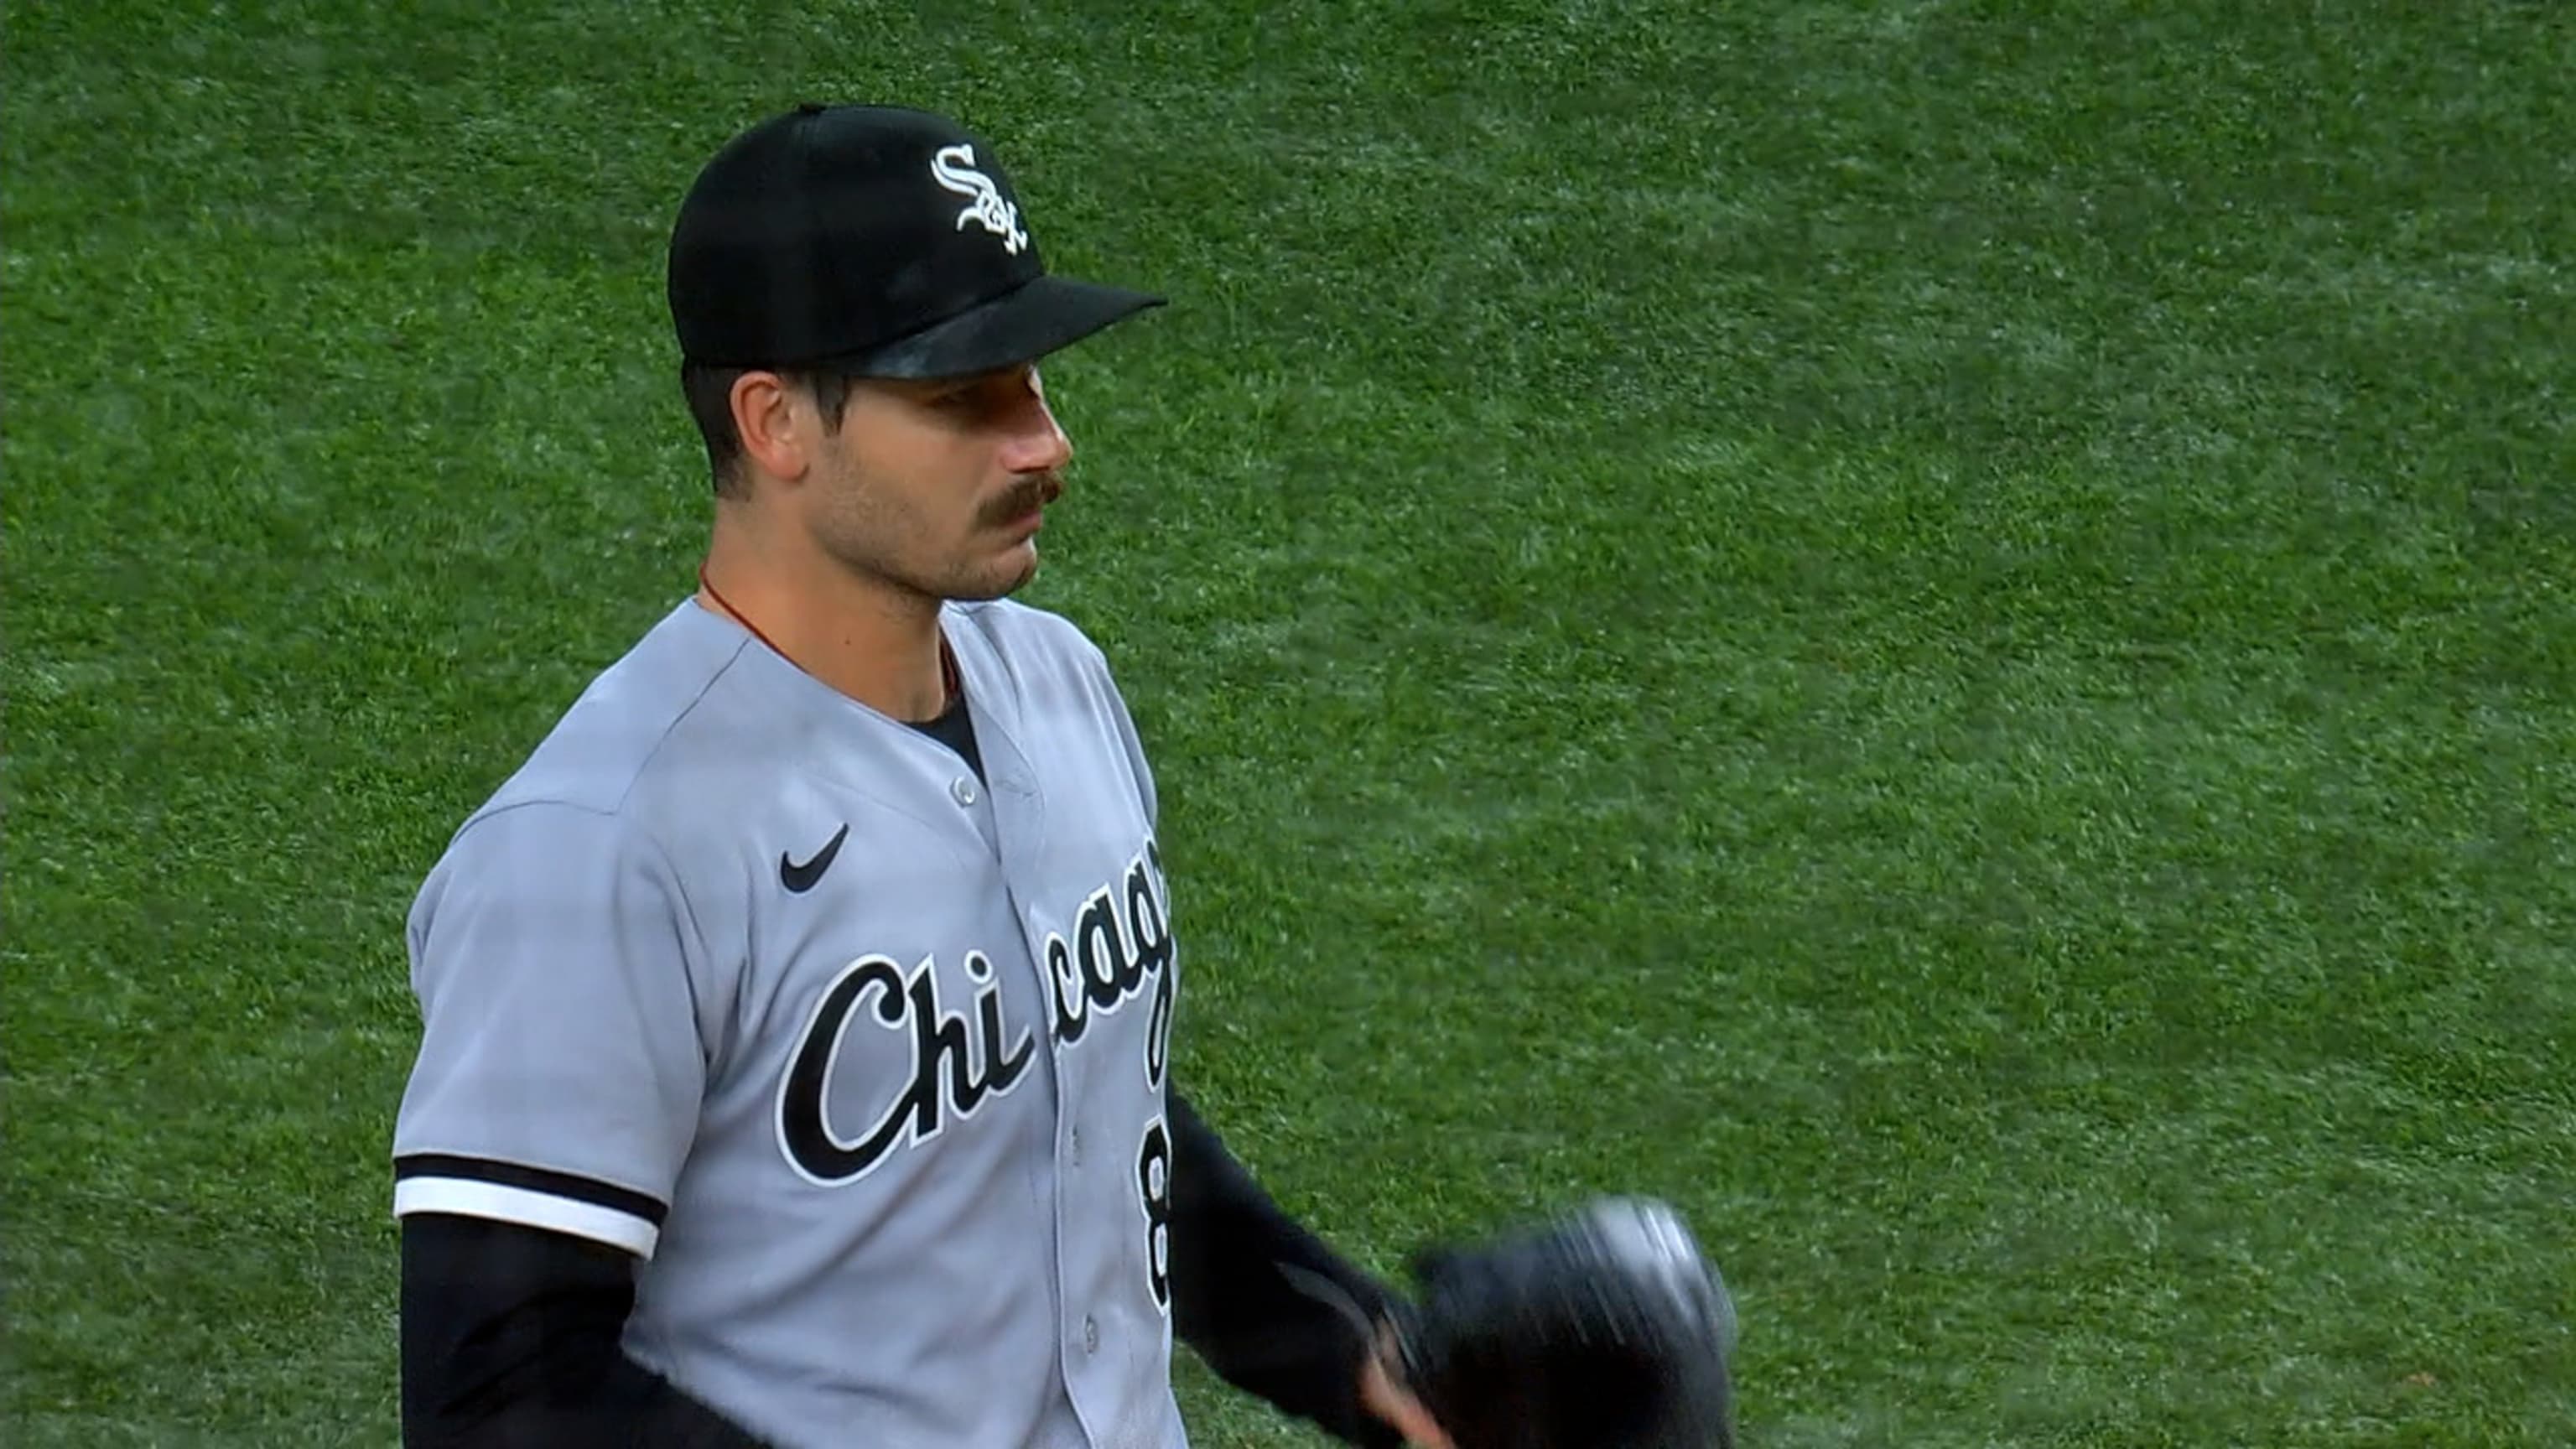 Dylan Cease's warning for the AL Central after pitching gem vs. Twins